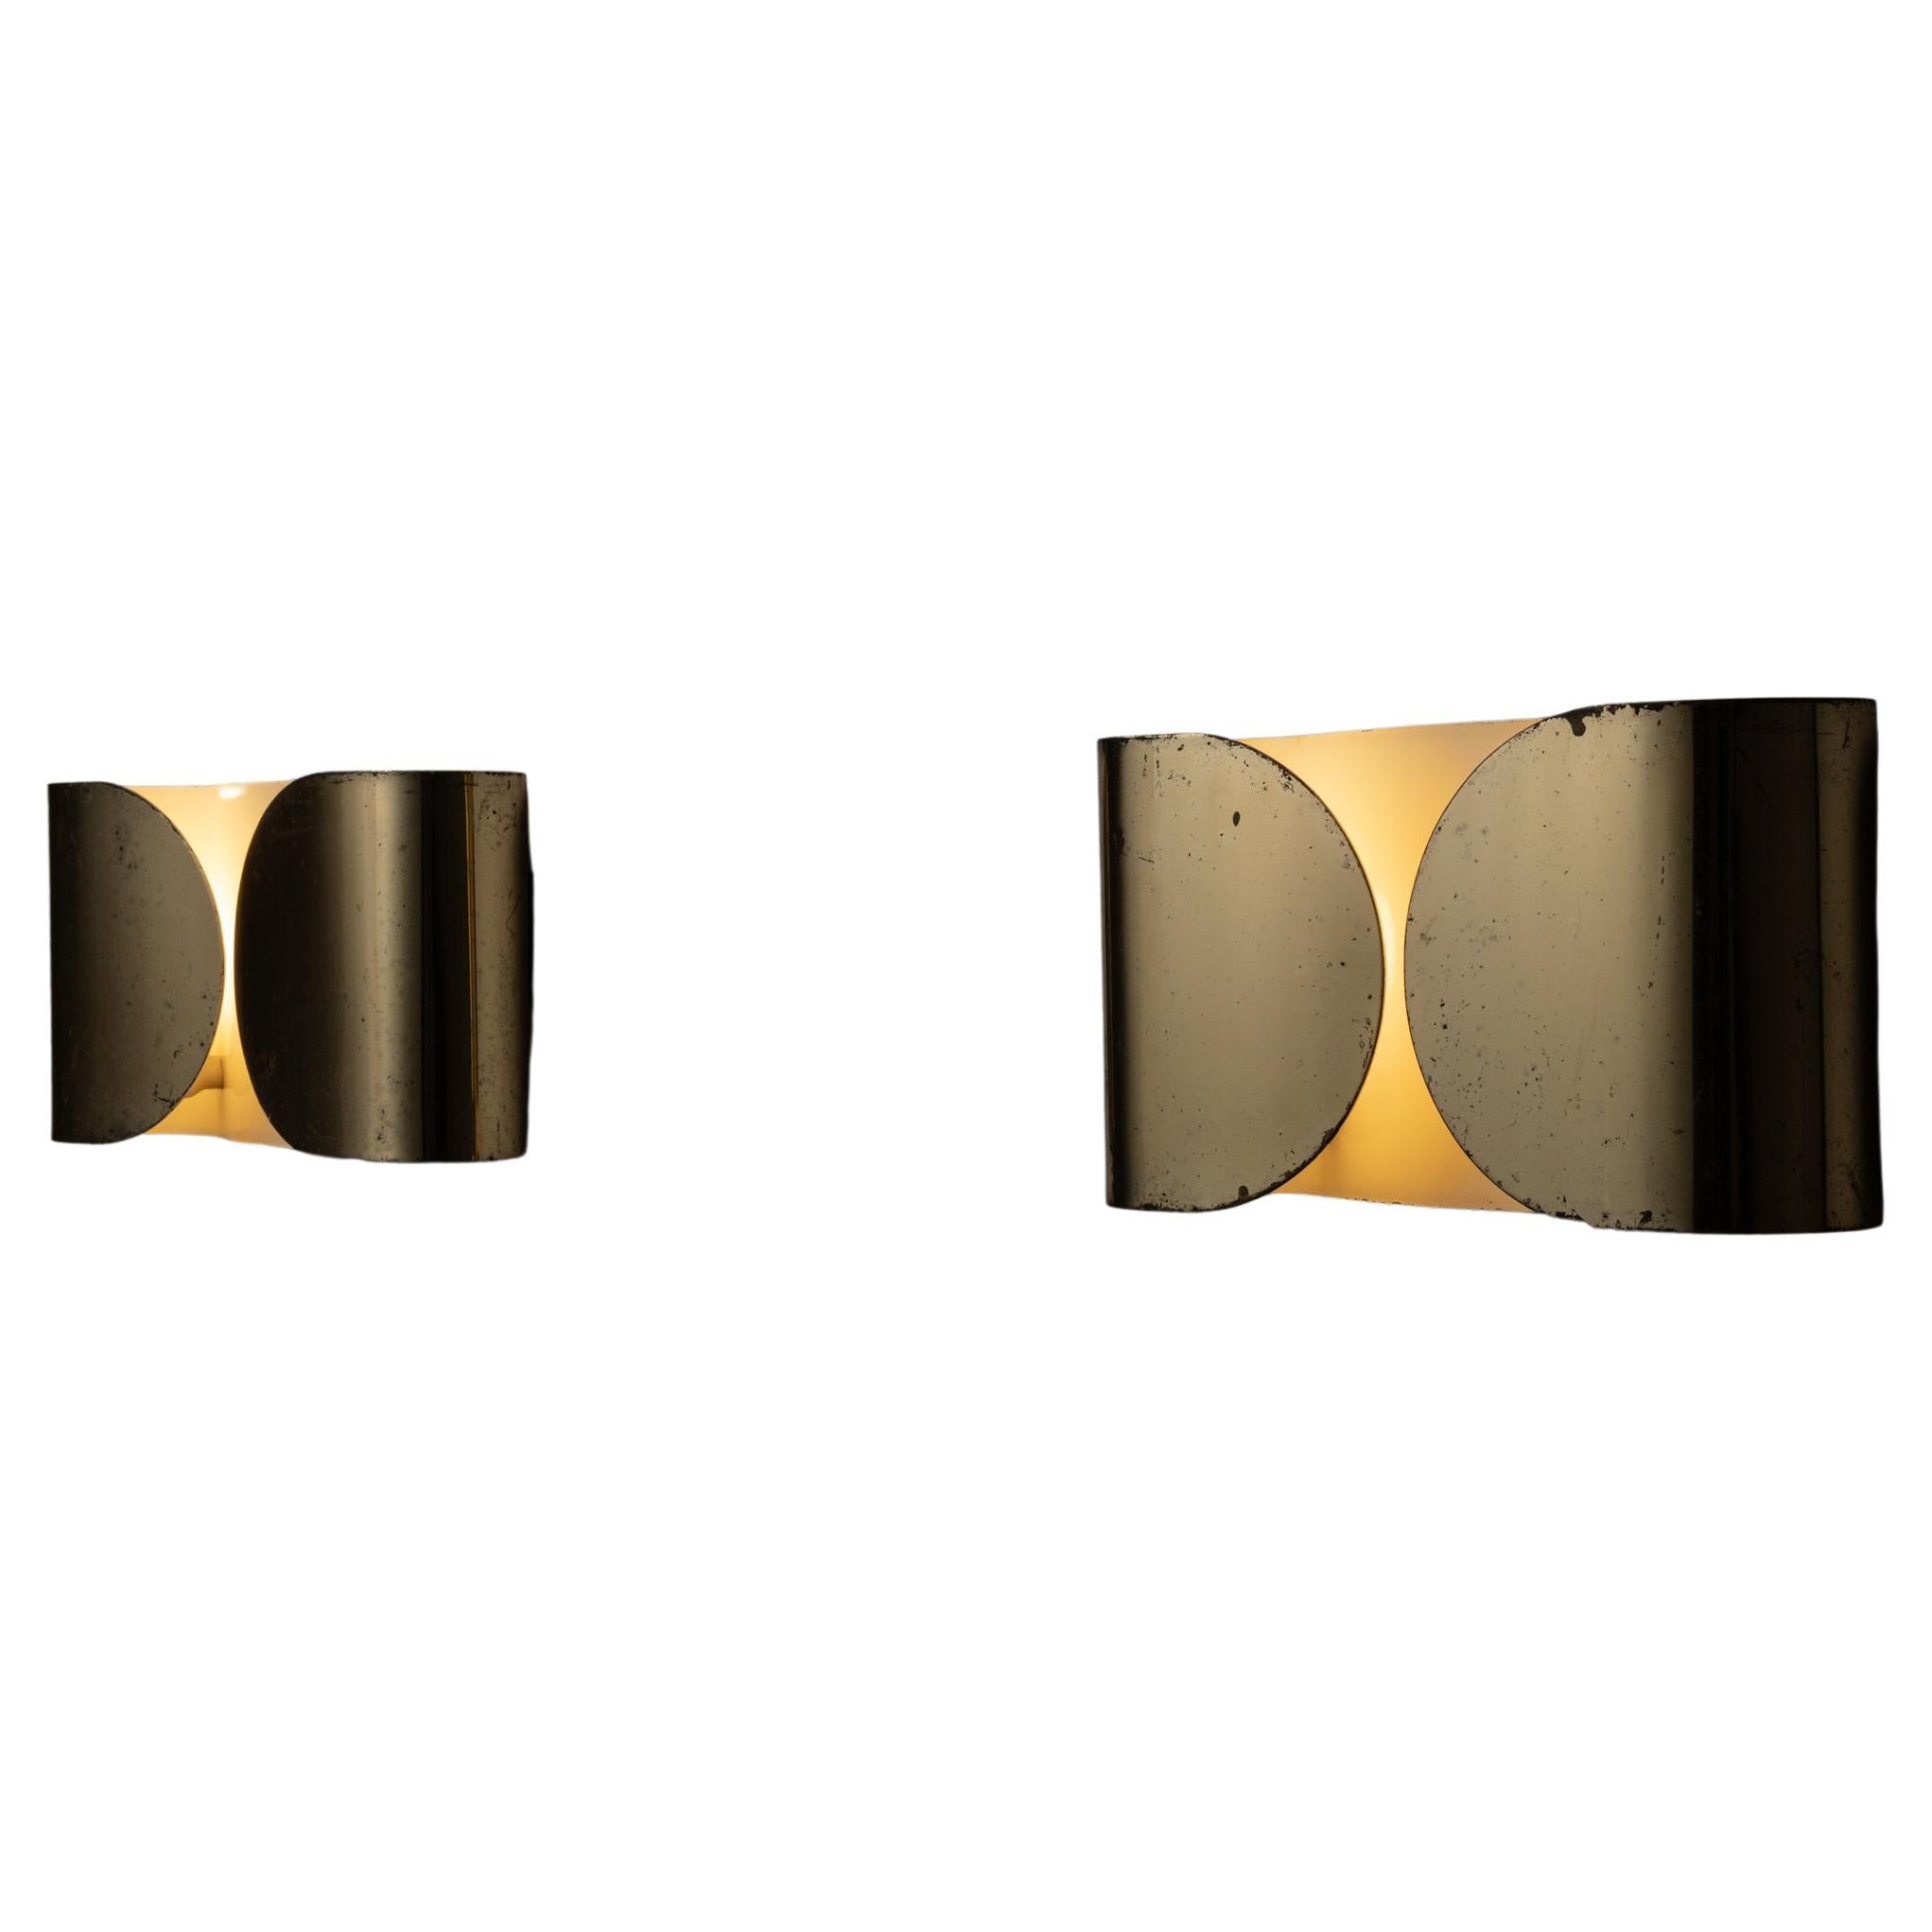 Pair of Foglio Sconces by Tobia Scarpa for Flos